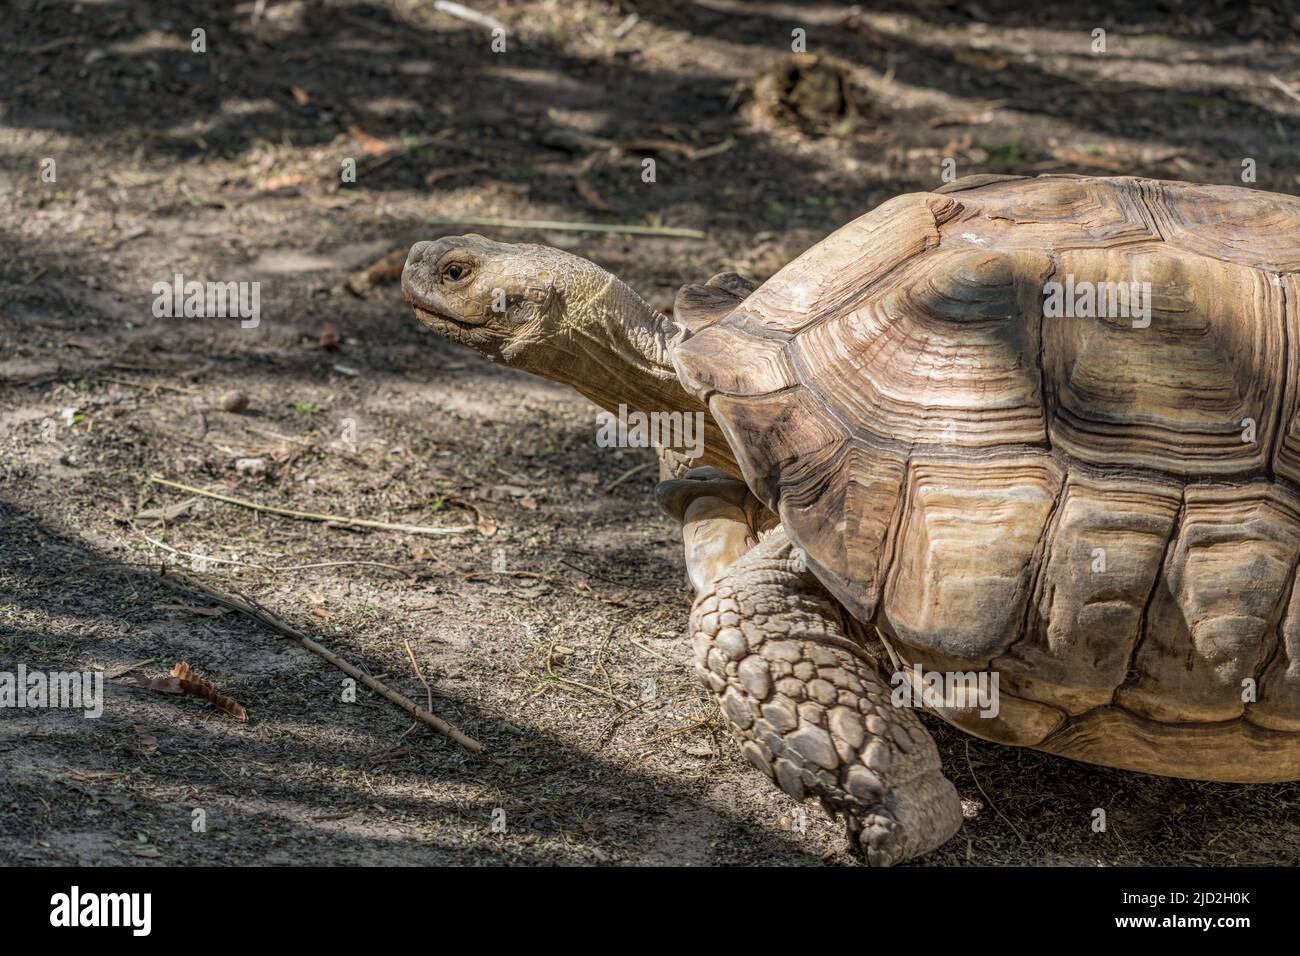 African Spurred Tortoise or Sulcata Tortoise, Centrochelyx sulcata, in the South Padre Island Birding & Nature Center, Texas. Stock Photo